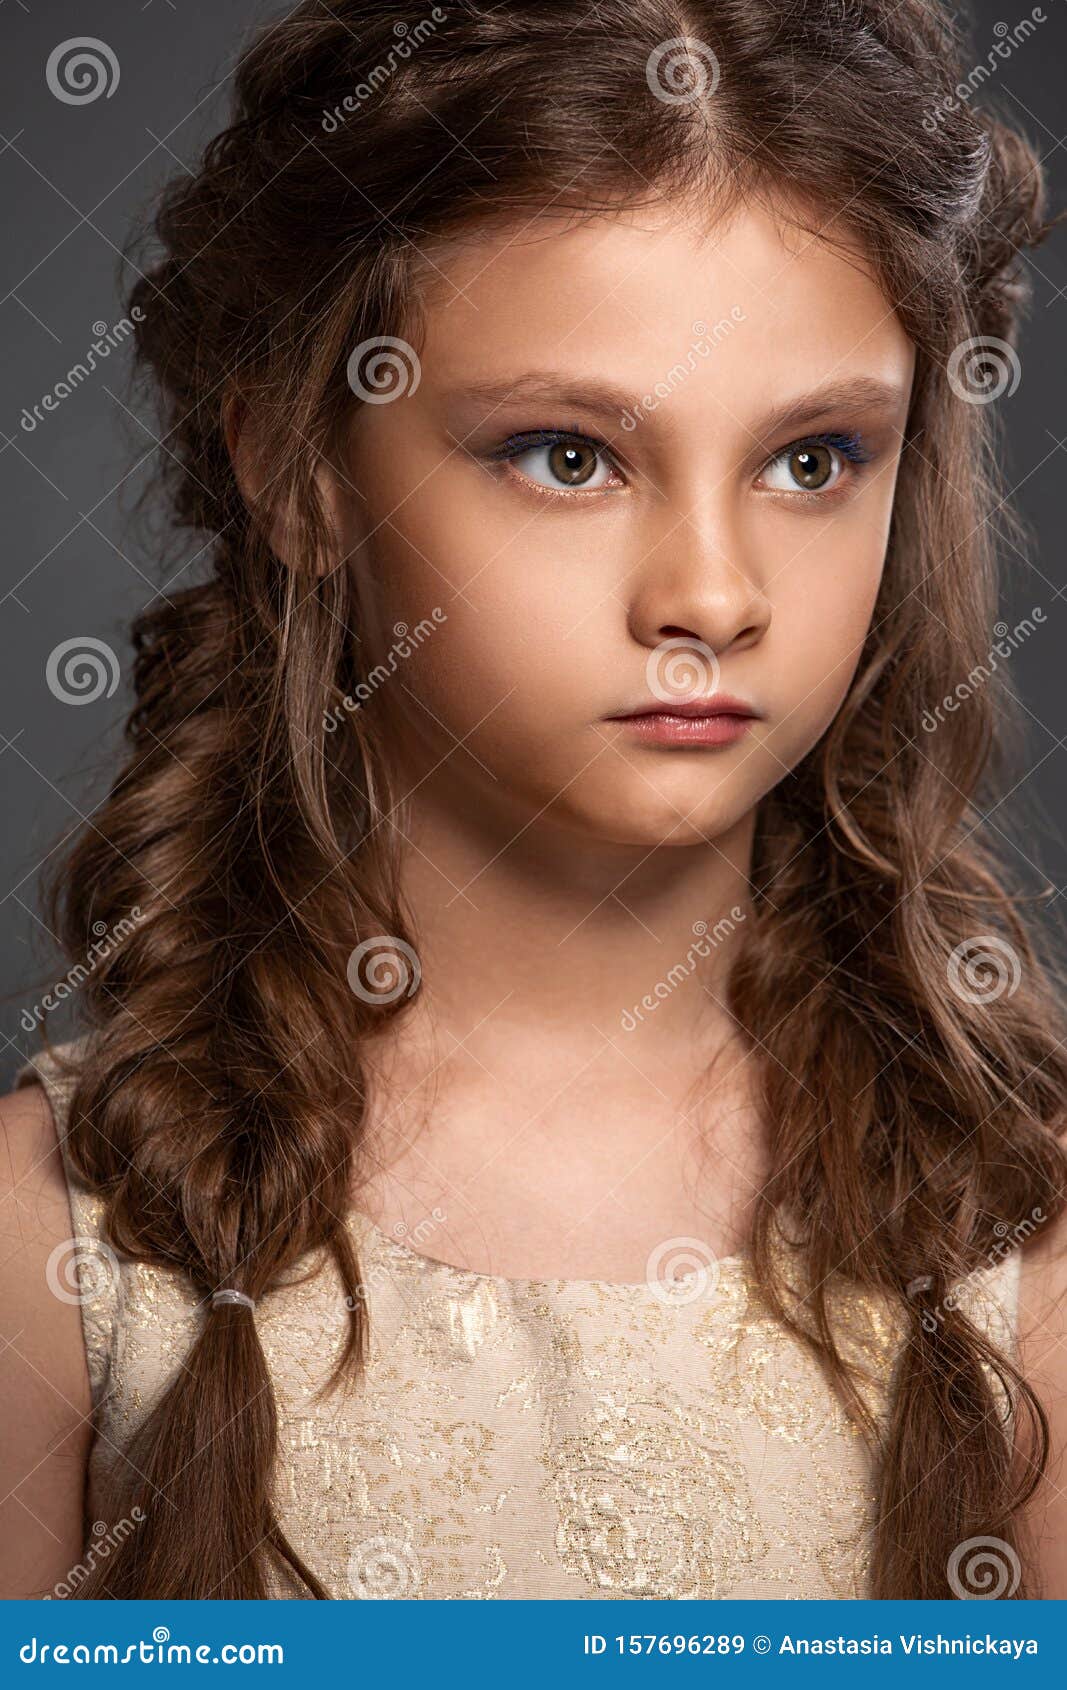 Beauty Portrait of Wedding Clean Makeup Kid Girl with Stylish Hairstyle.  Closeup Blonde Girl in White Dress. Boho Braid Stock Image - Image of  childhood, adorable: 157696289